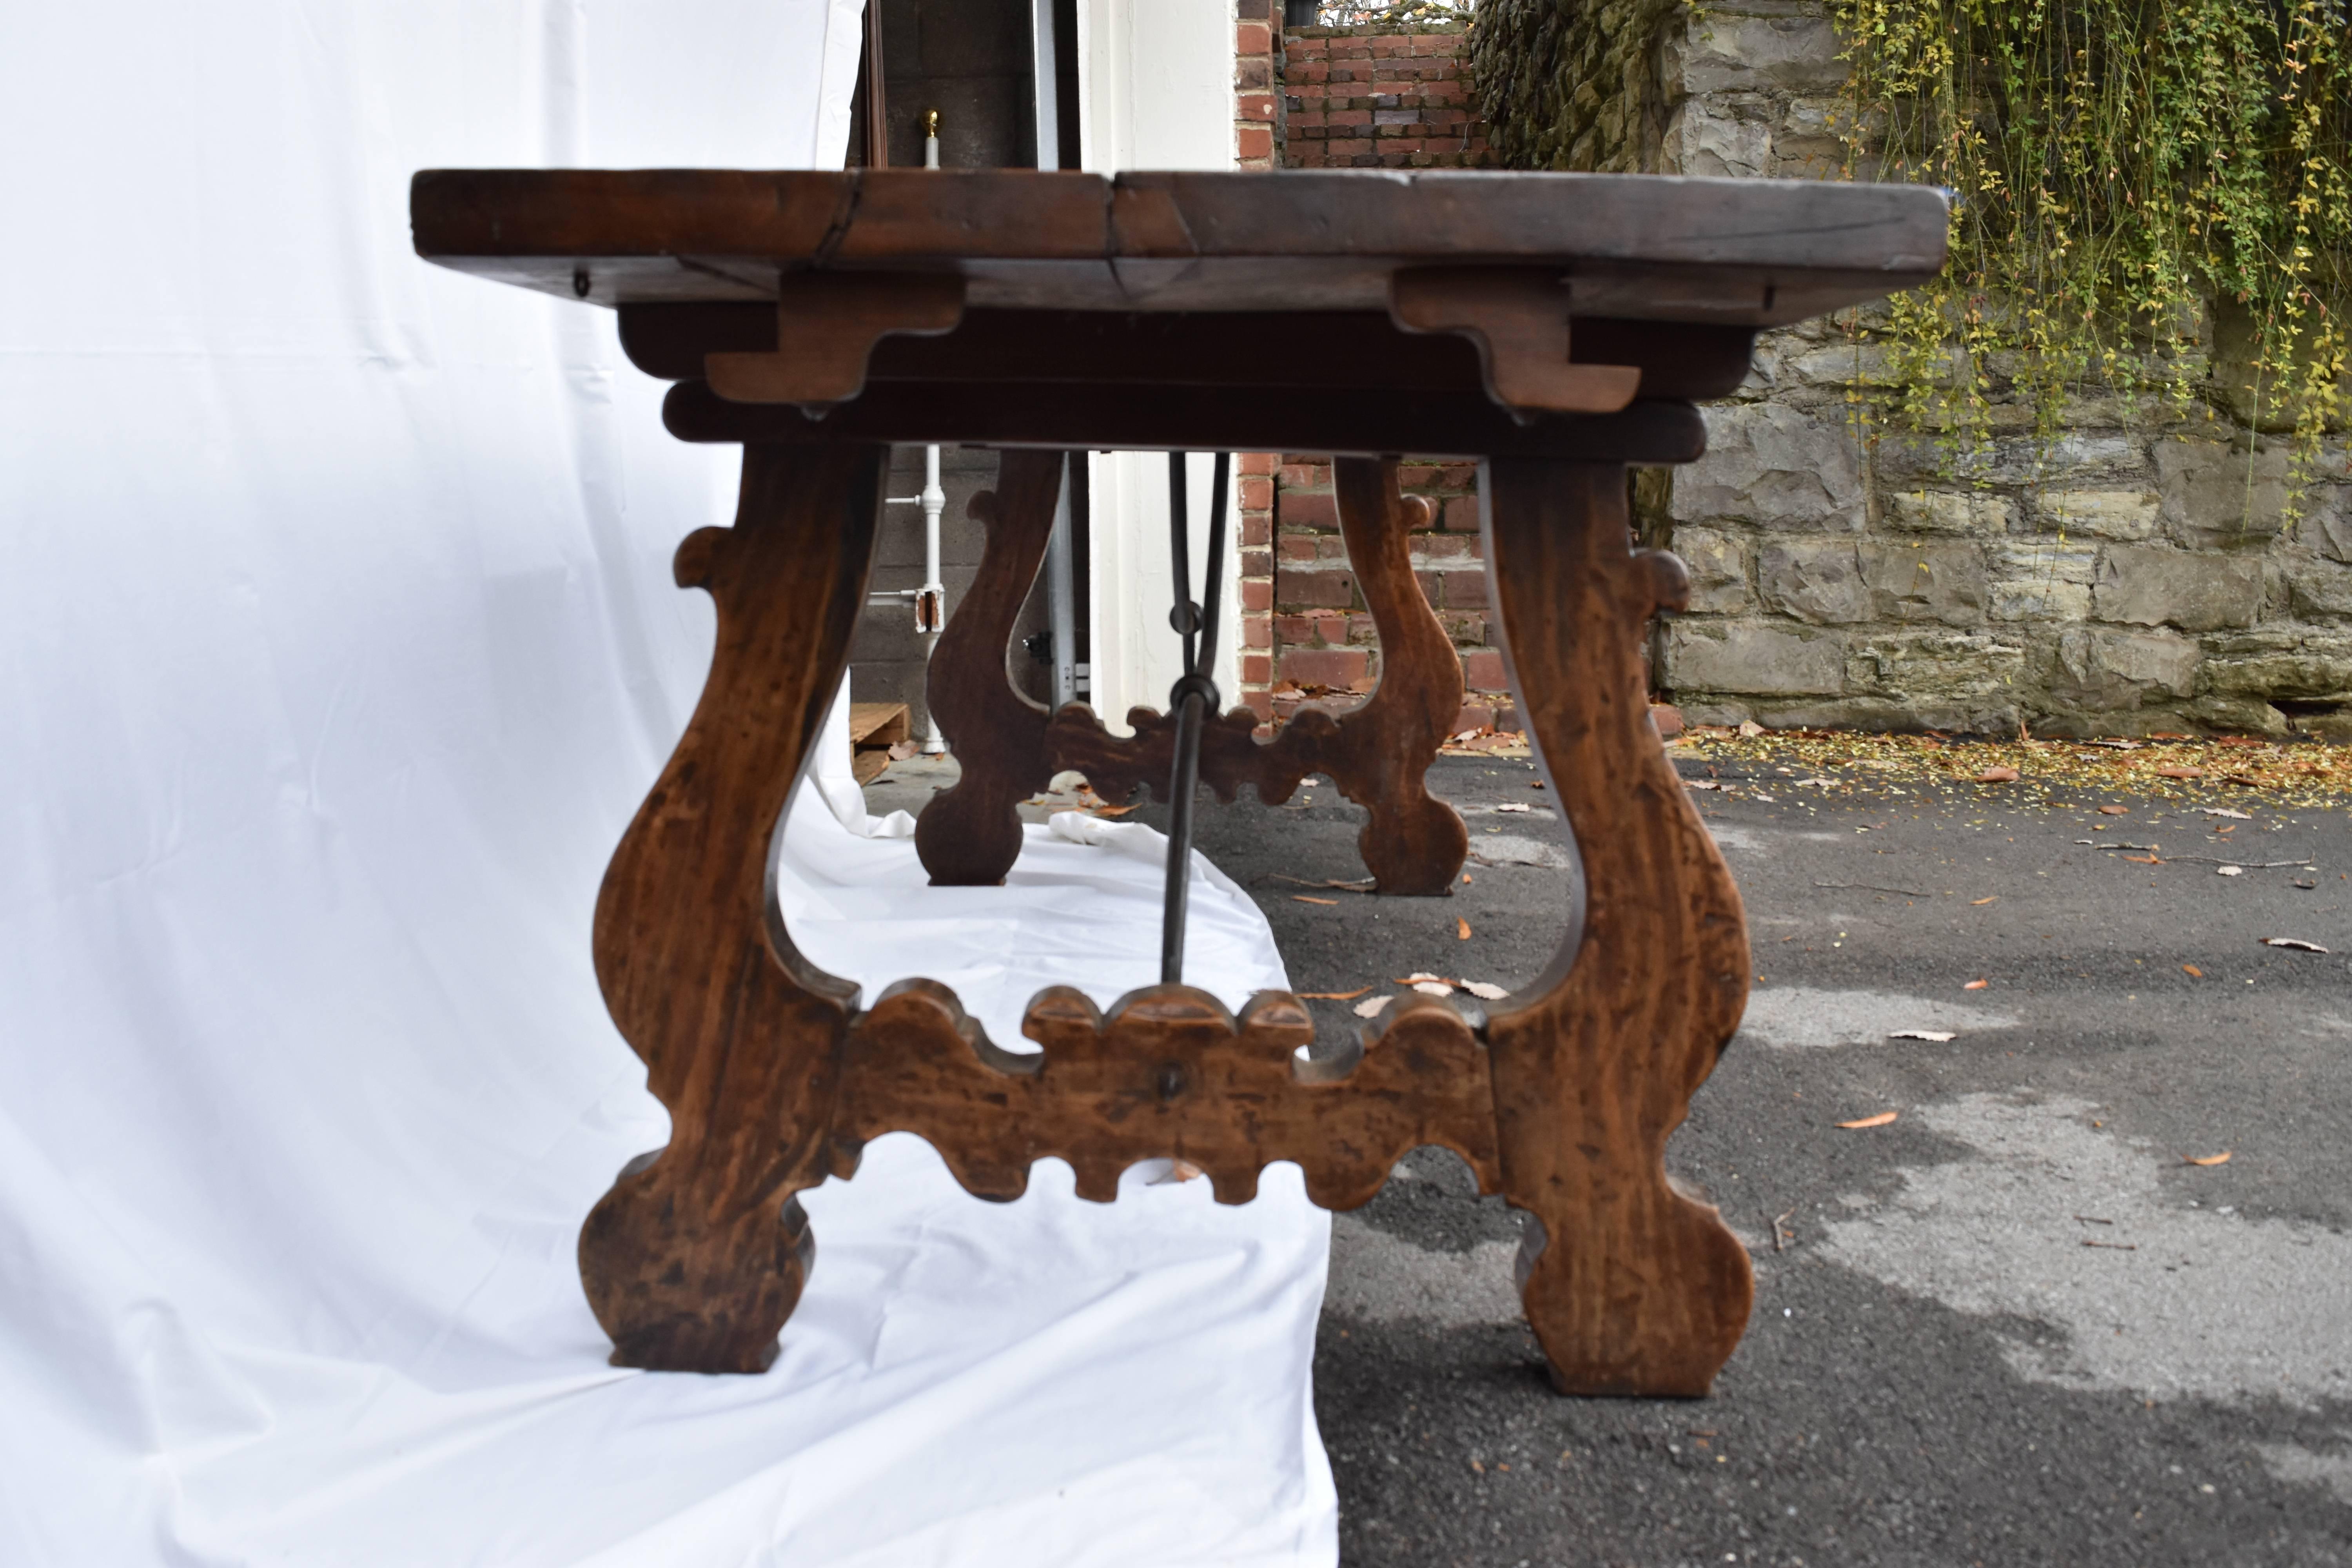 This 19th century Italian refectory table has the traditional lyre legs and iron cross. The top is walnut and has not been touched up.